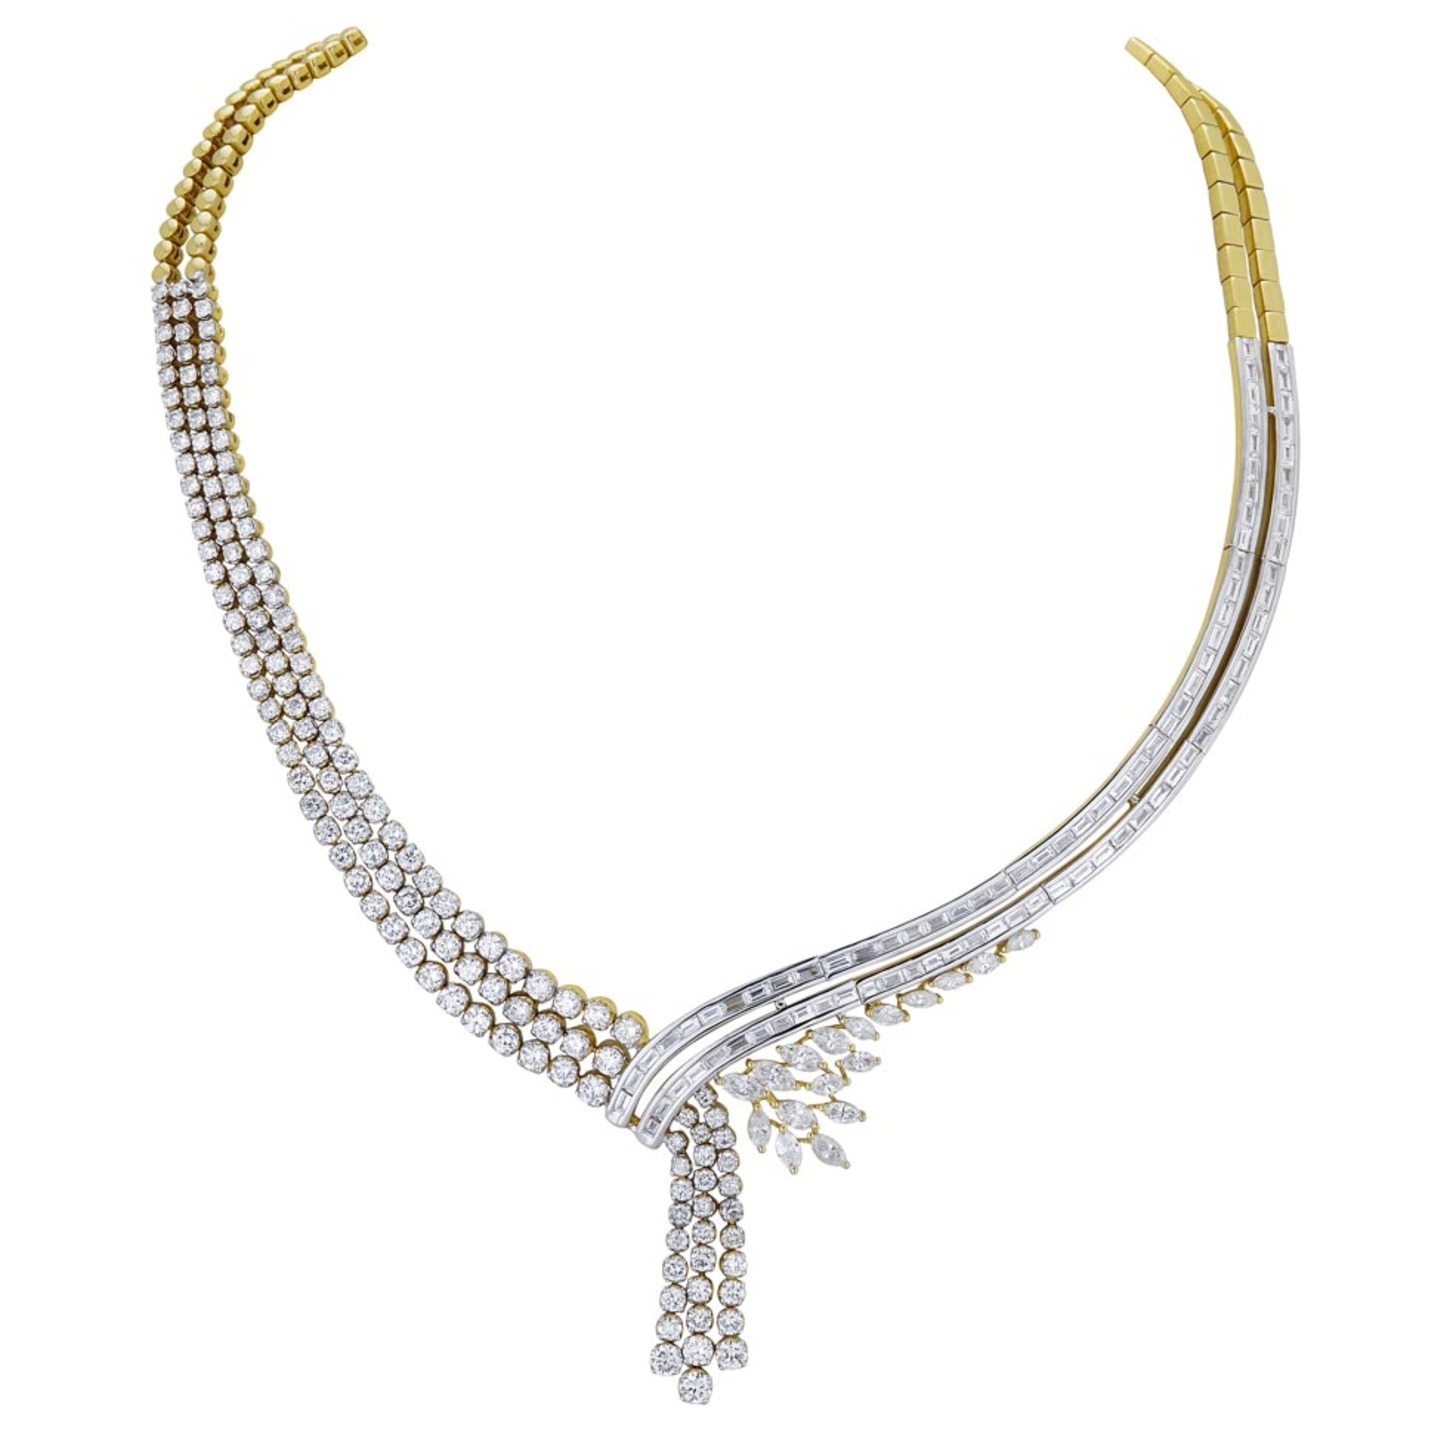 Elegant Diamond Necklace and Earrings